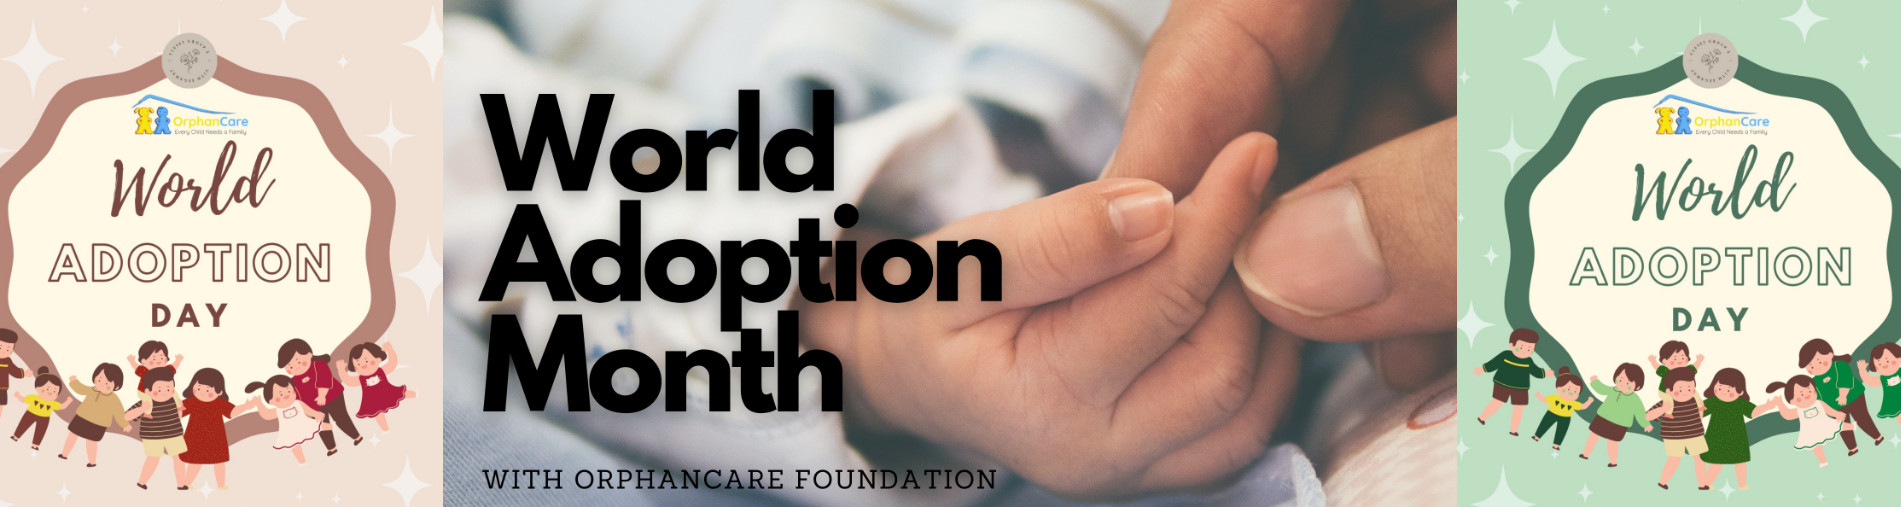 World Adoption Month with OrphanCare